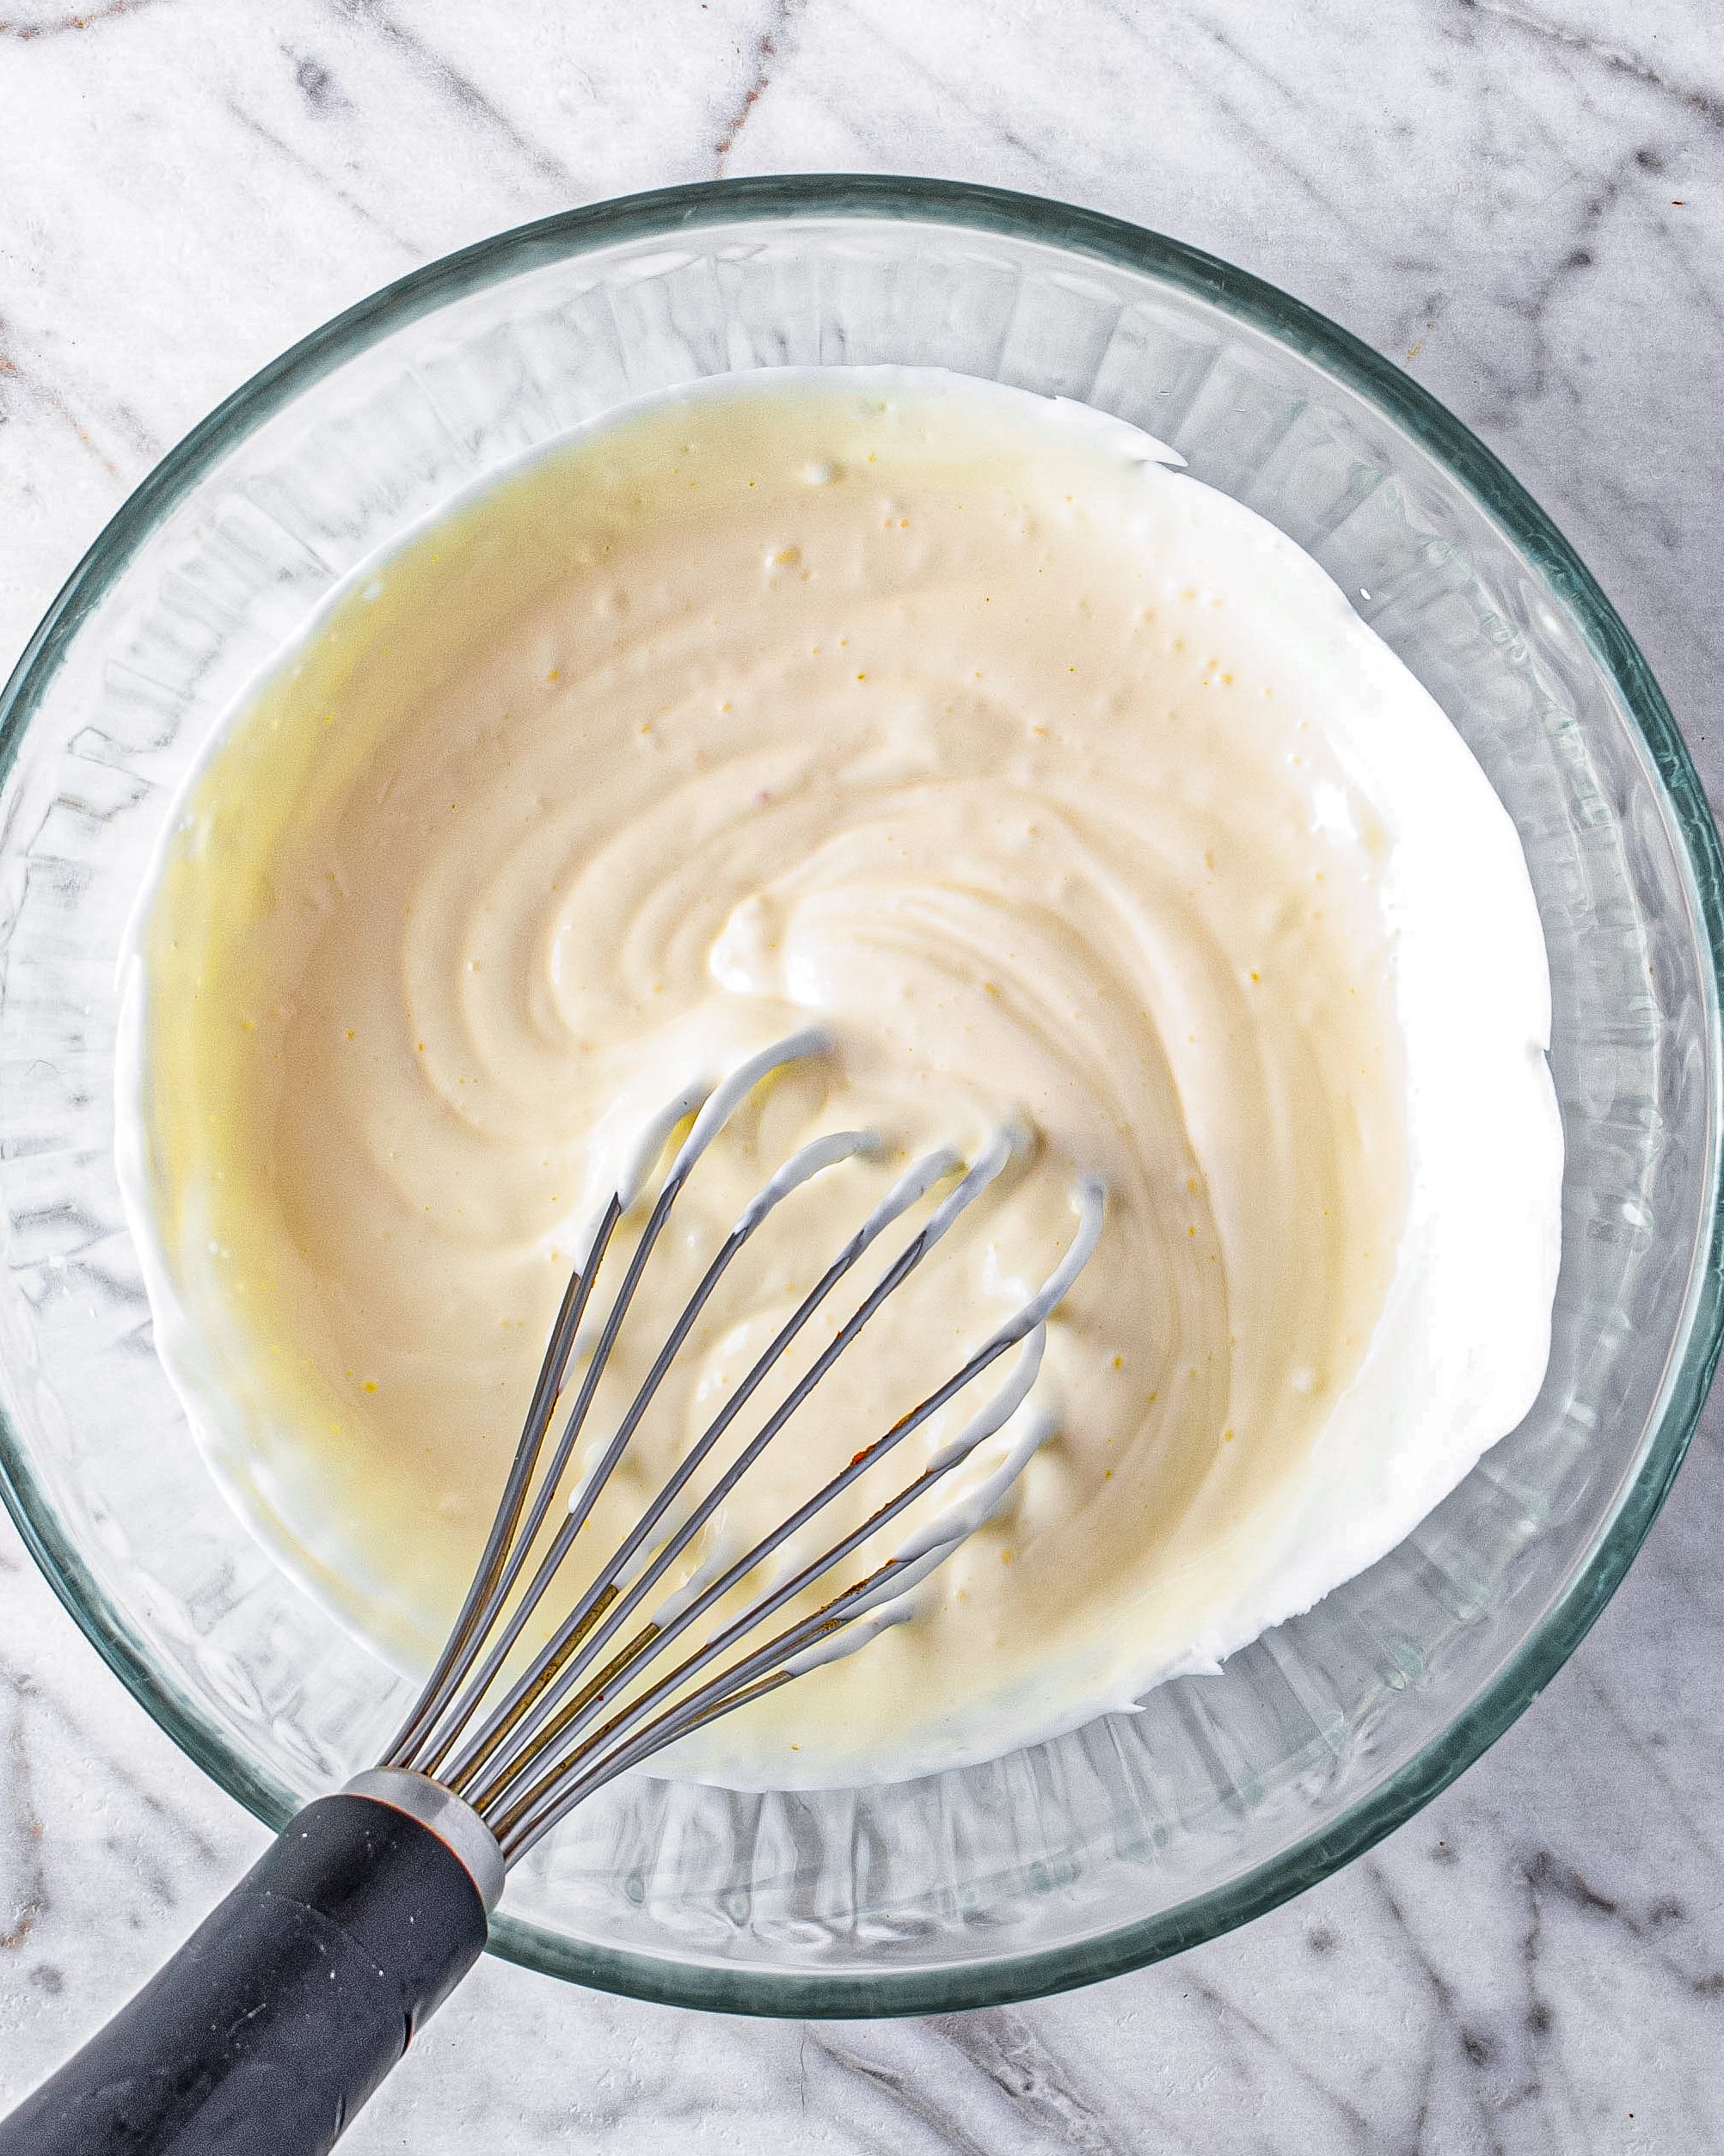 Using a large bowl, whisk together the mayo and sour cream.